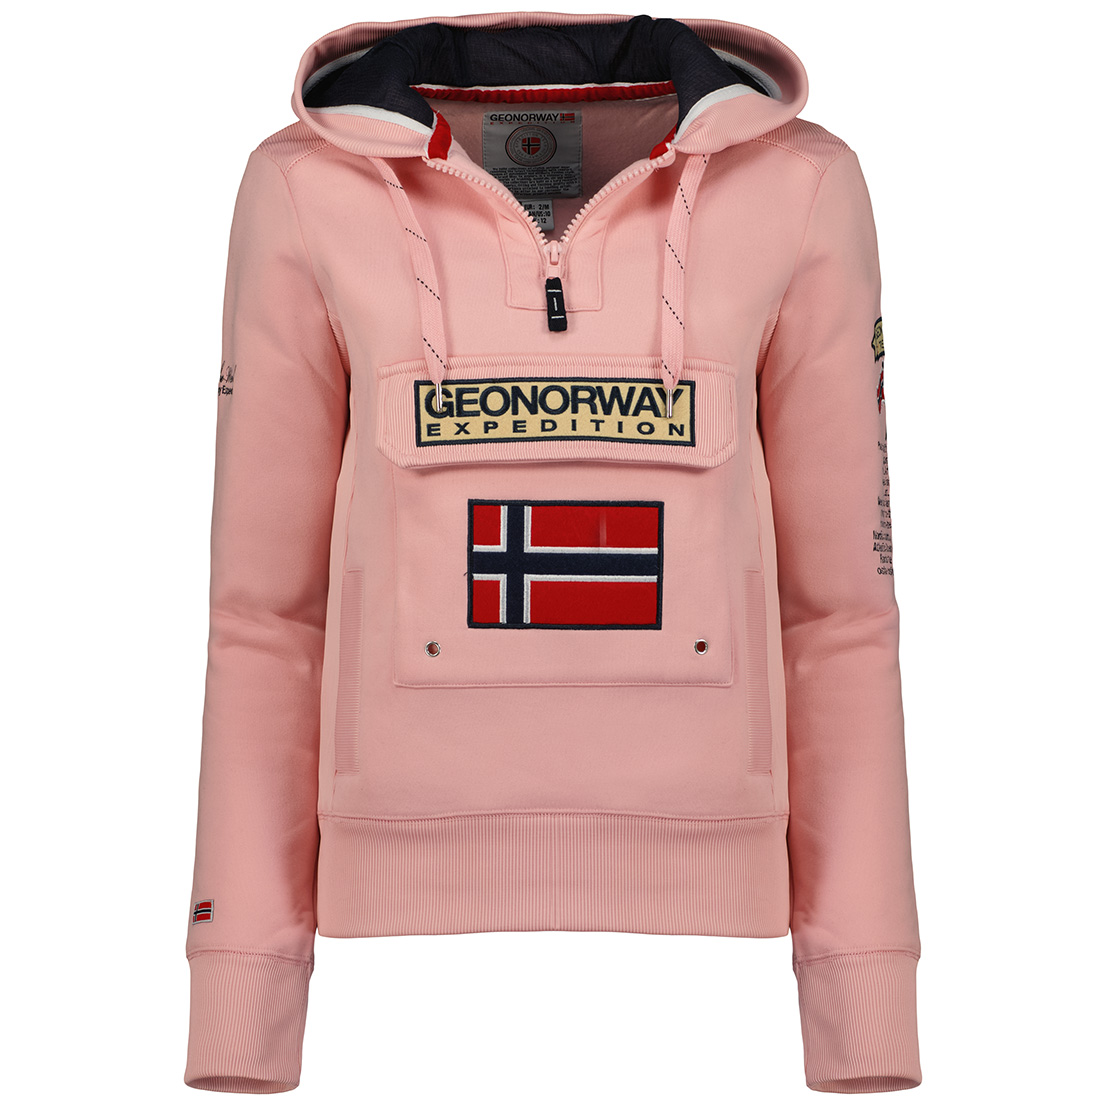 LADY ROSA | Geographical Norway